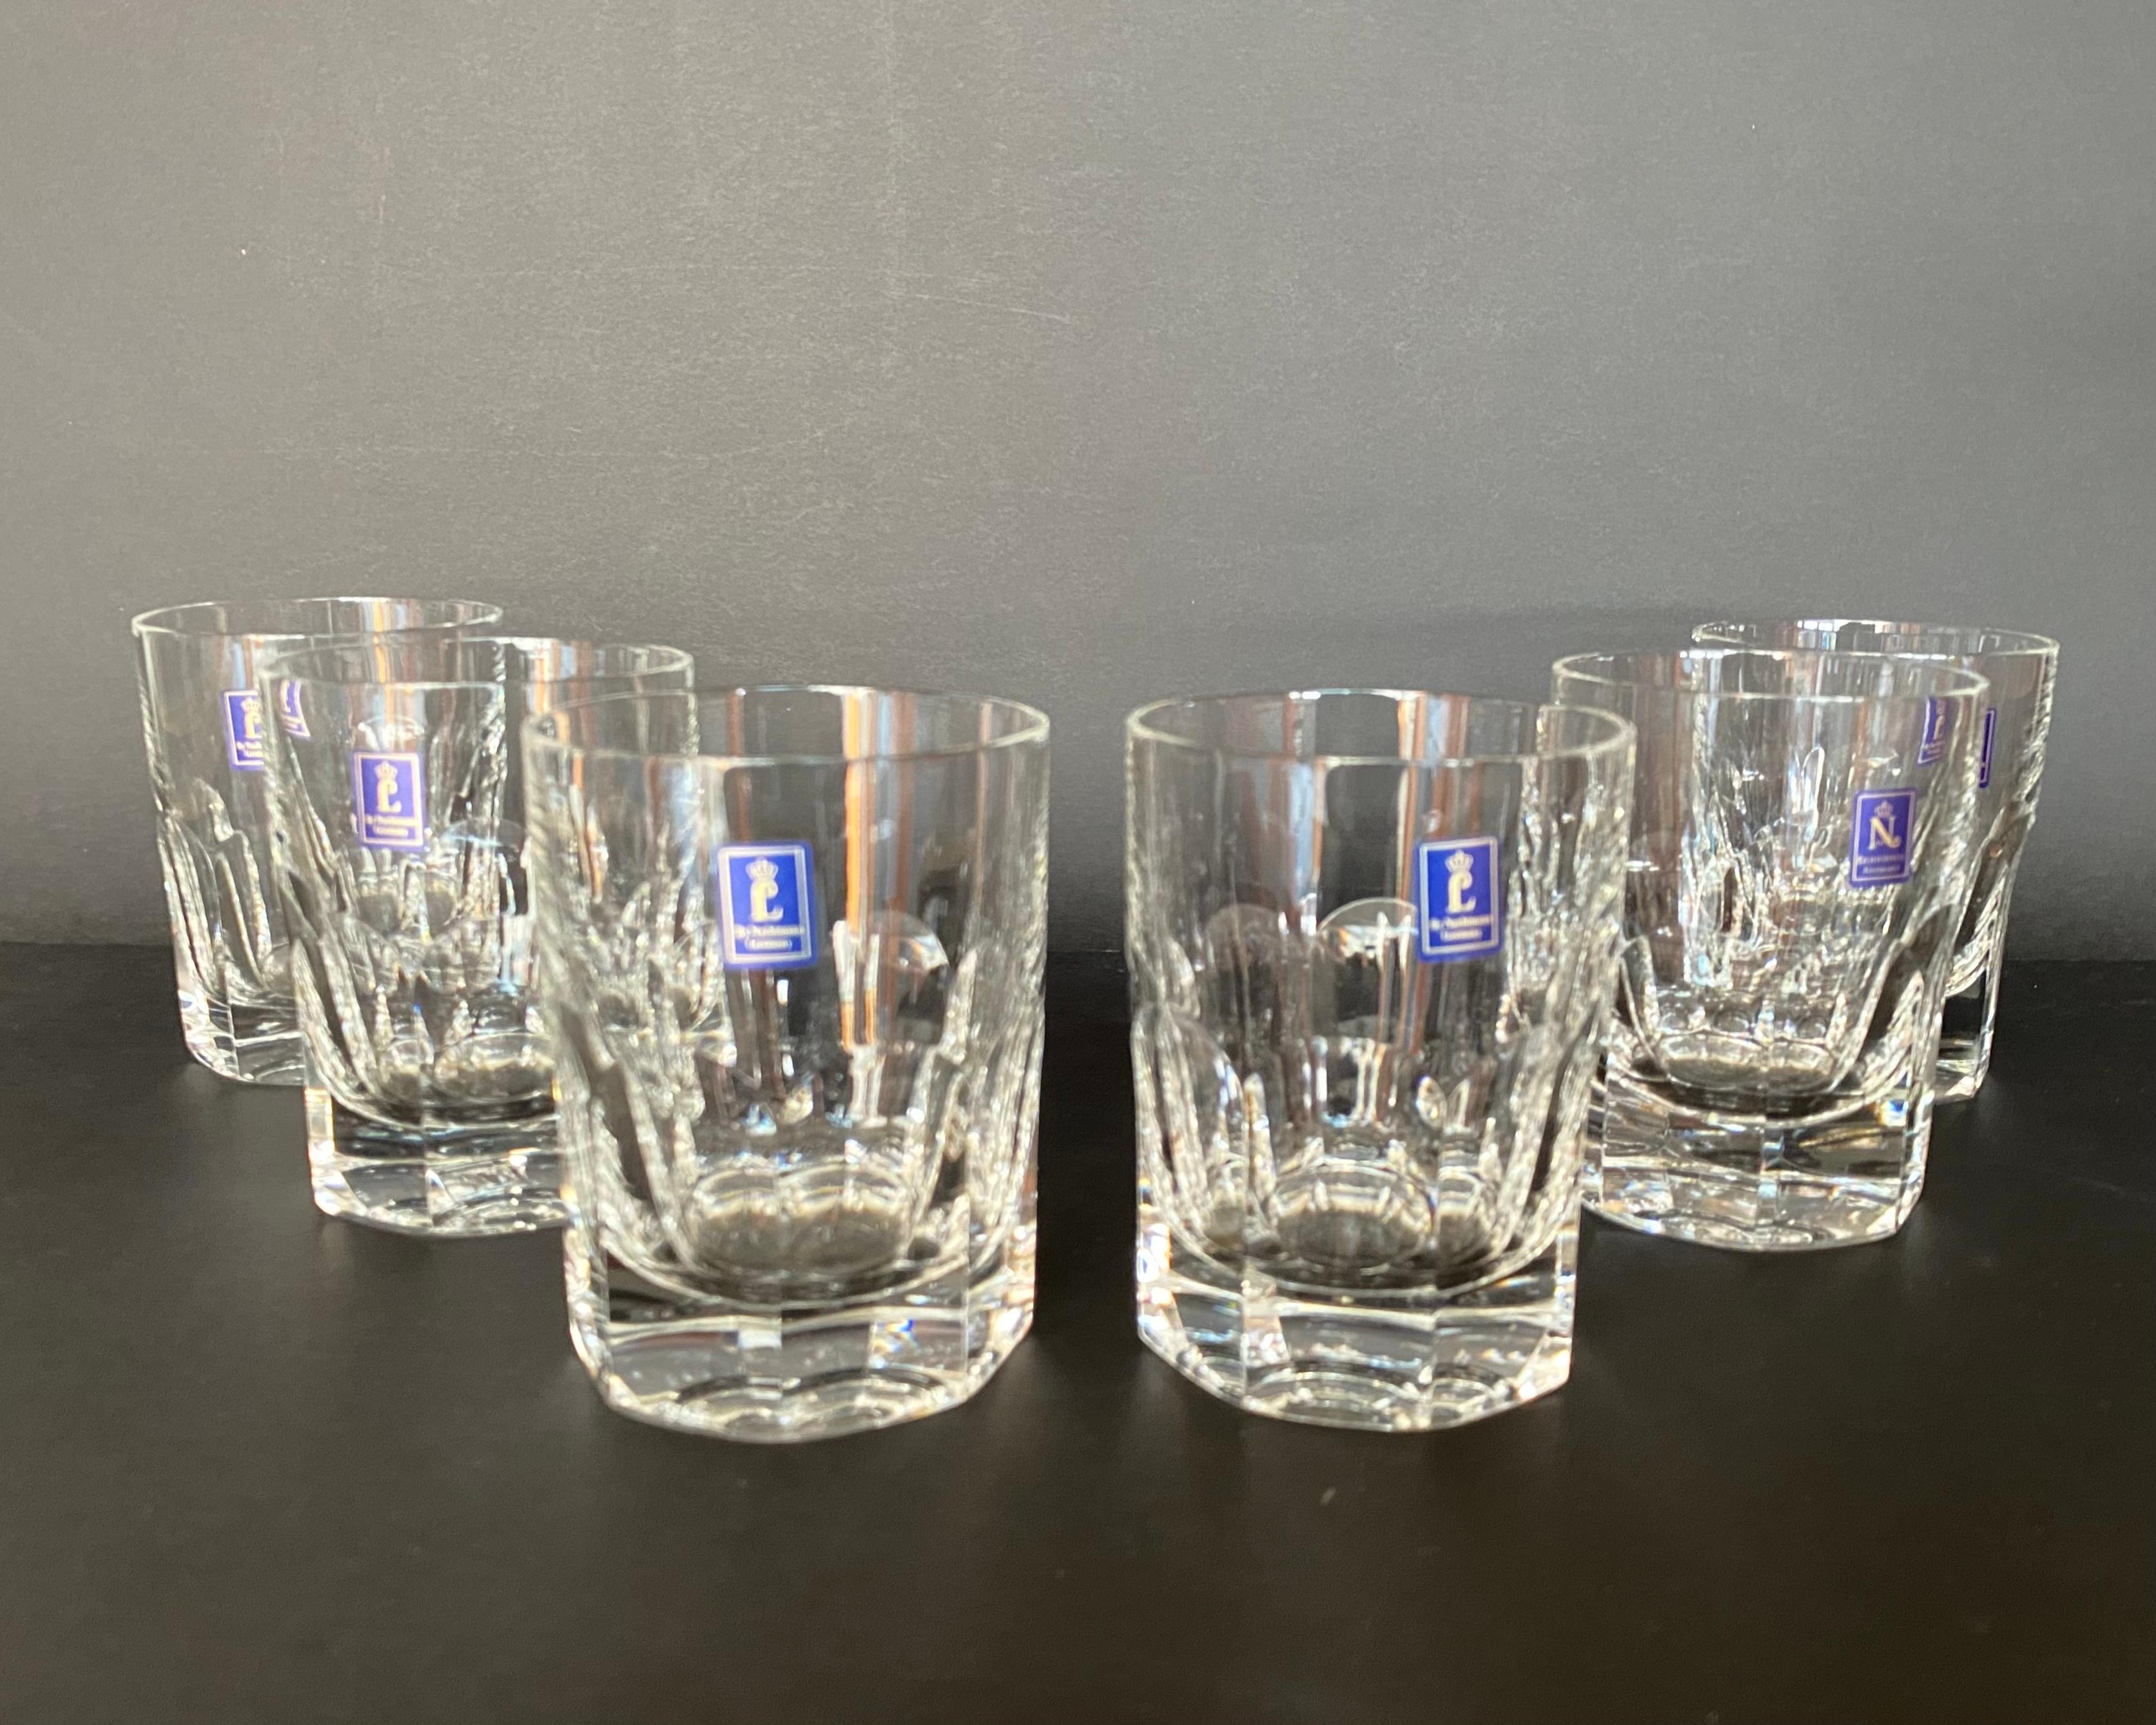 A set of new cut crystal tumblers 6 pcs from the German manufactory Nachtmann Bleikristall, Alexandra series, 1990s.

Labeled drinking glasses, new in the box.

The timeless glasses are mouth-blown and hand polished with a timeless classic